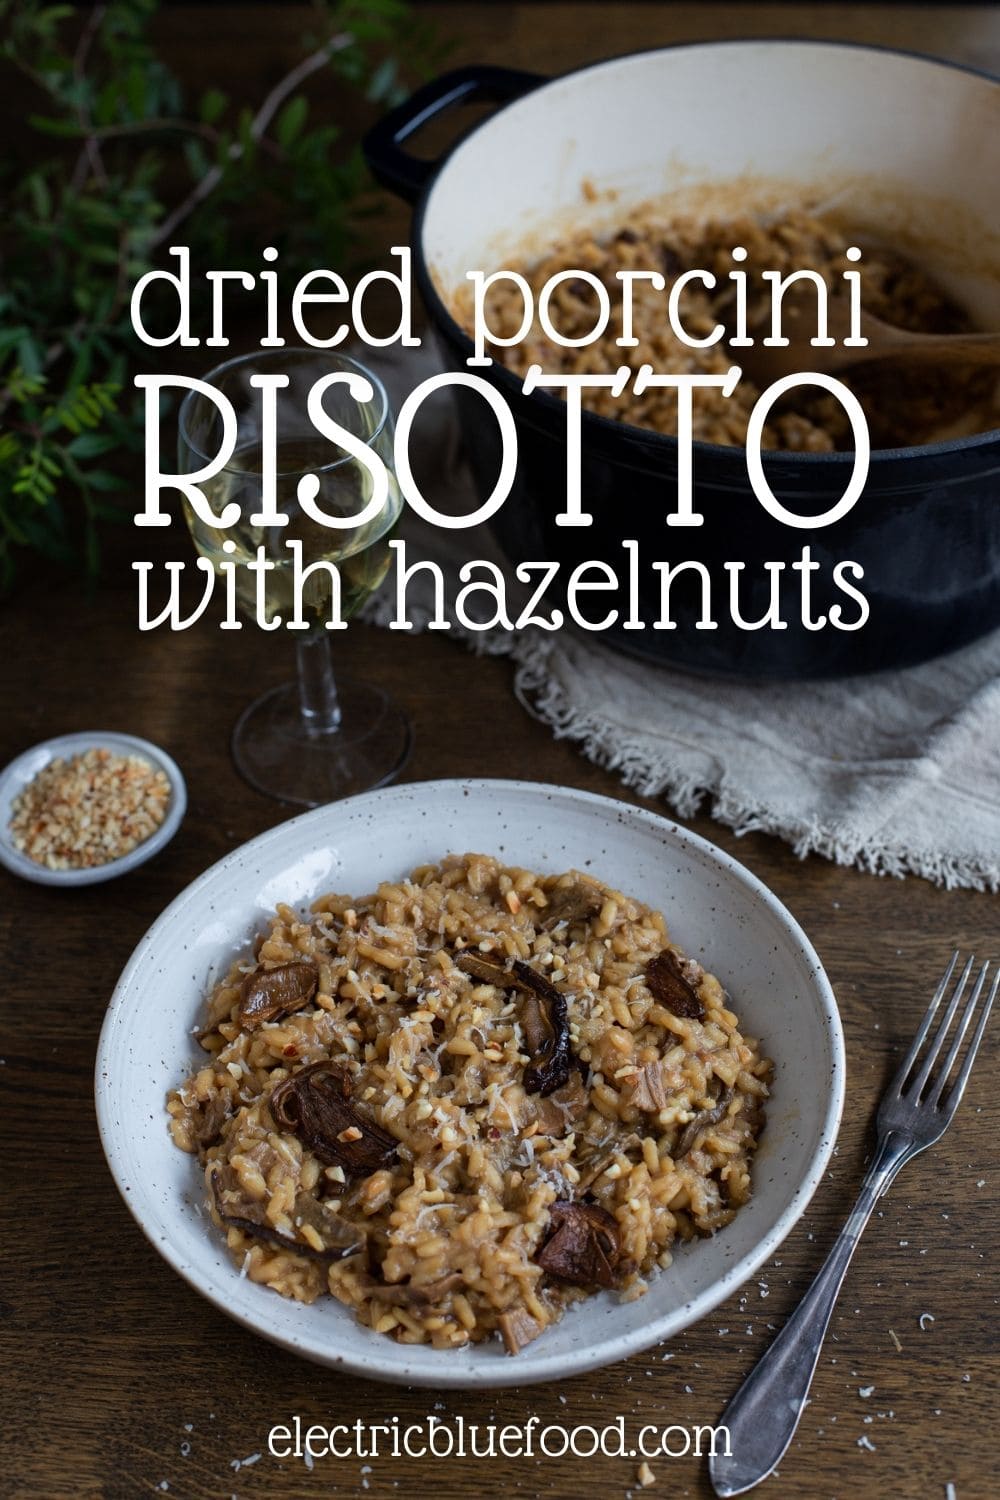 Mushroom risotto with dried porcini and chopped hazelnuts. Dried porcini are re-hydrated in water and used as main ingredient in this gourmet risotto recipe.